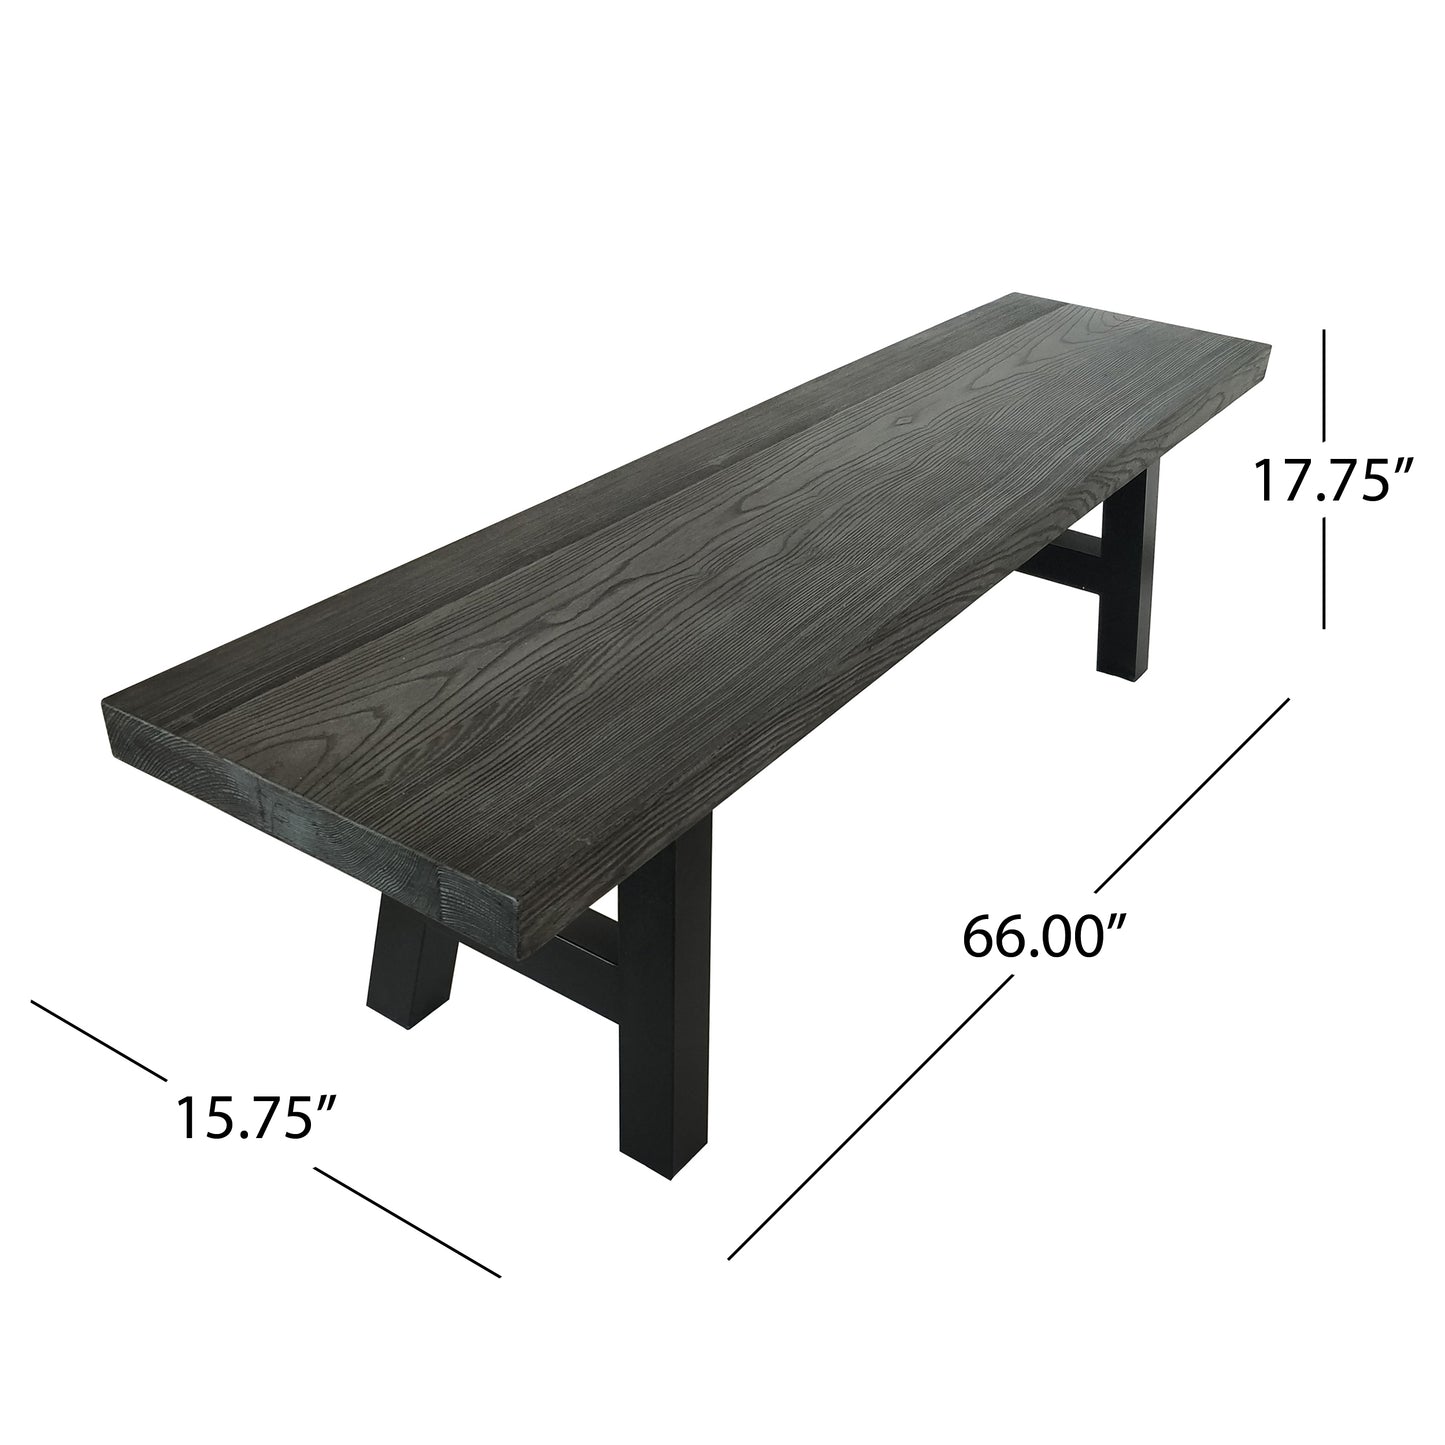 Edward Outdoor Light Weight Concrete Dining Bench